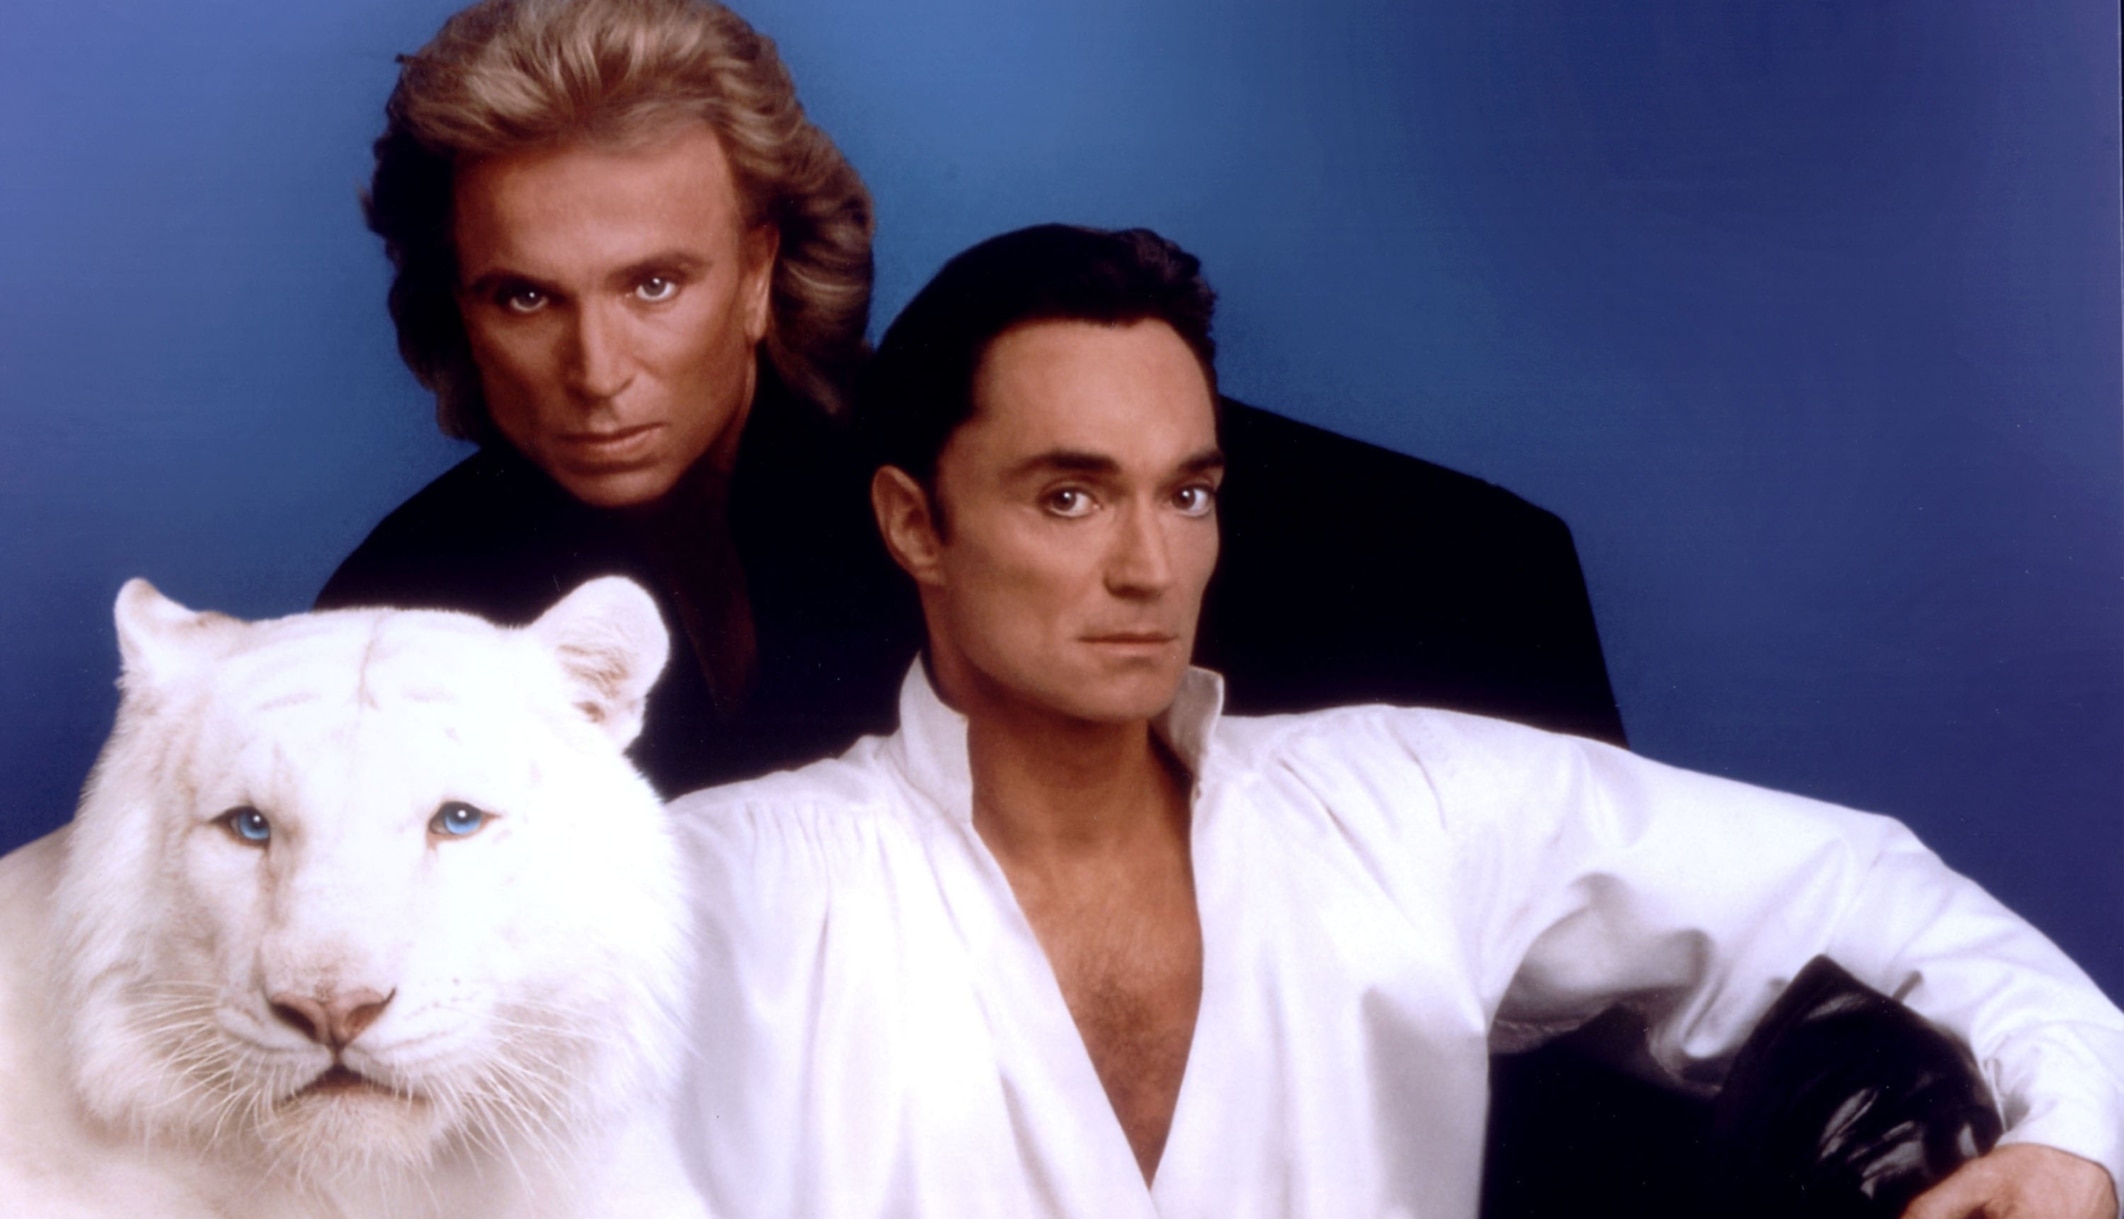 Siegfried Fischbacher and Roy Horn posing with a white tiger